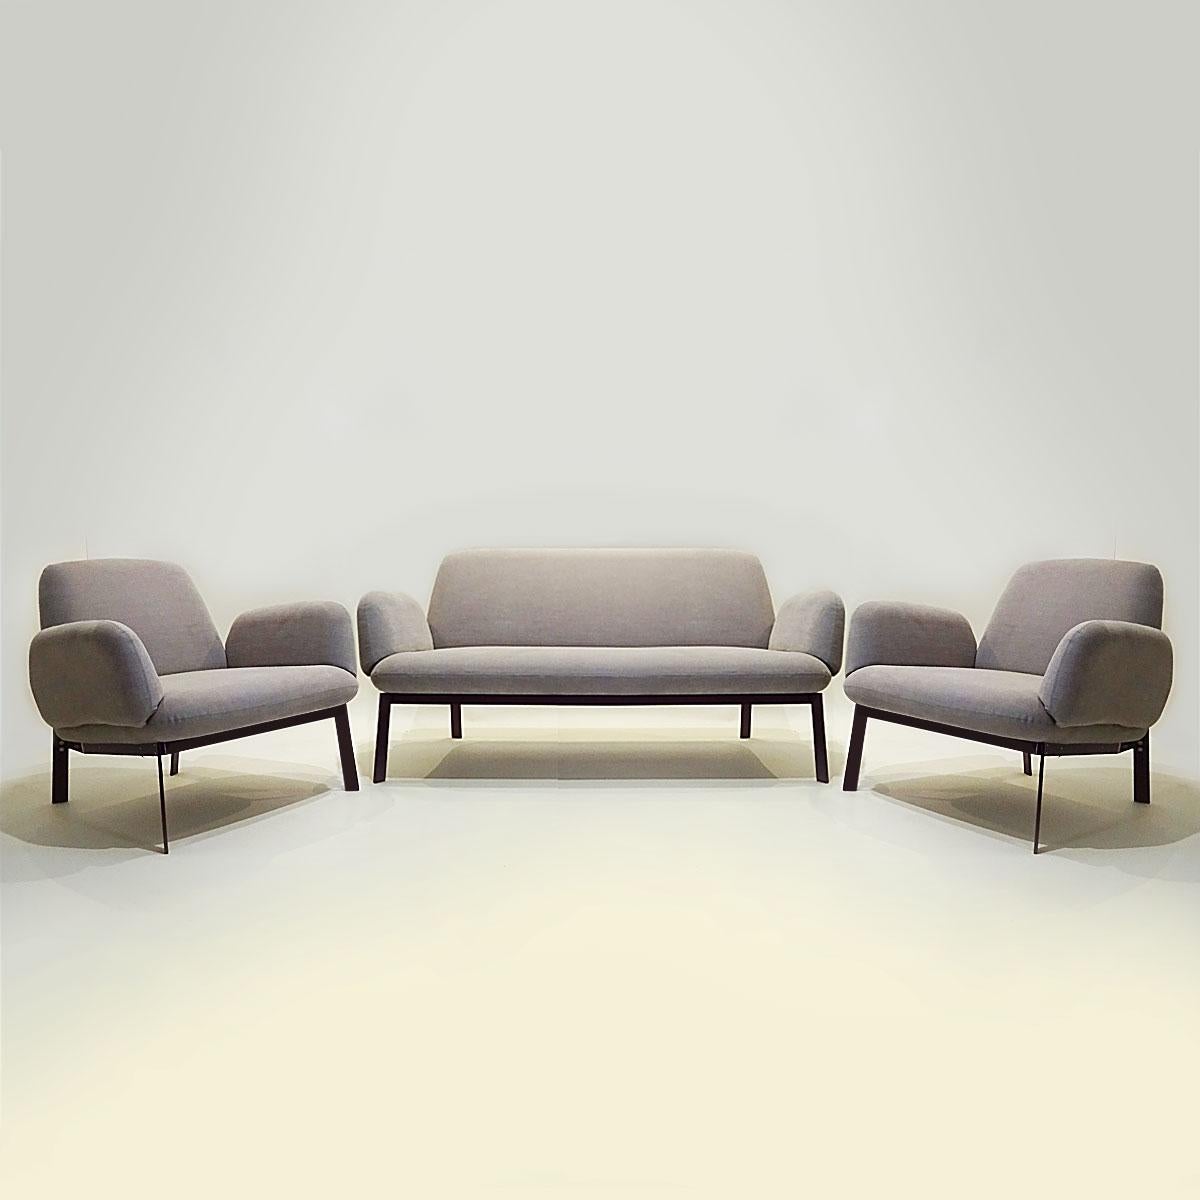 A brand new condition Klauser and Carpenter contemporary vintage style compact Easy chair and sofa set for Established & Sons.

Contemporary vintage may sound like an odd description but it’s very much what we’ve seen in furniture trends over the